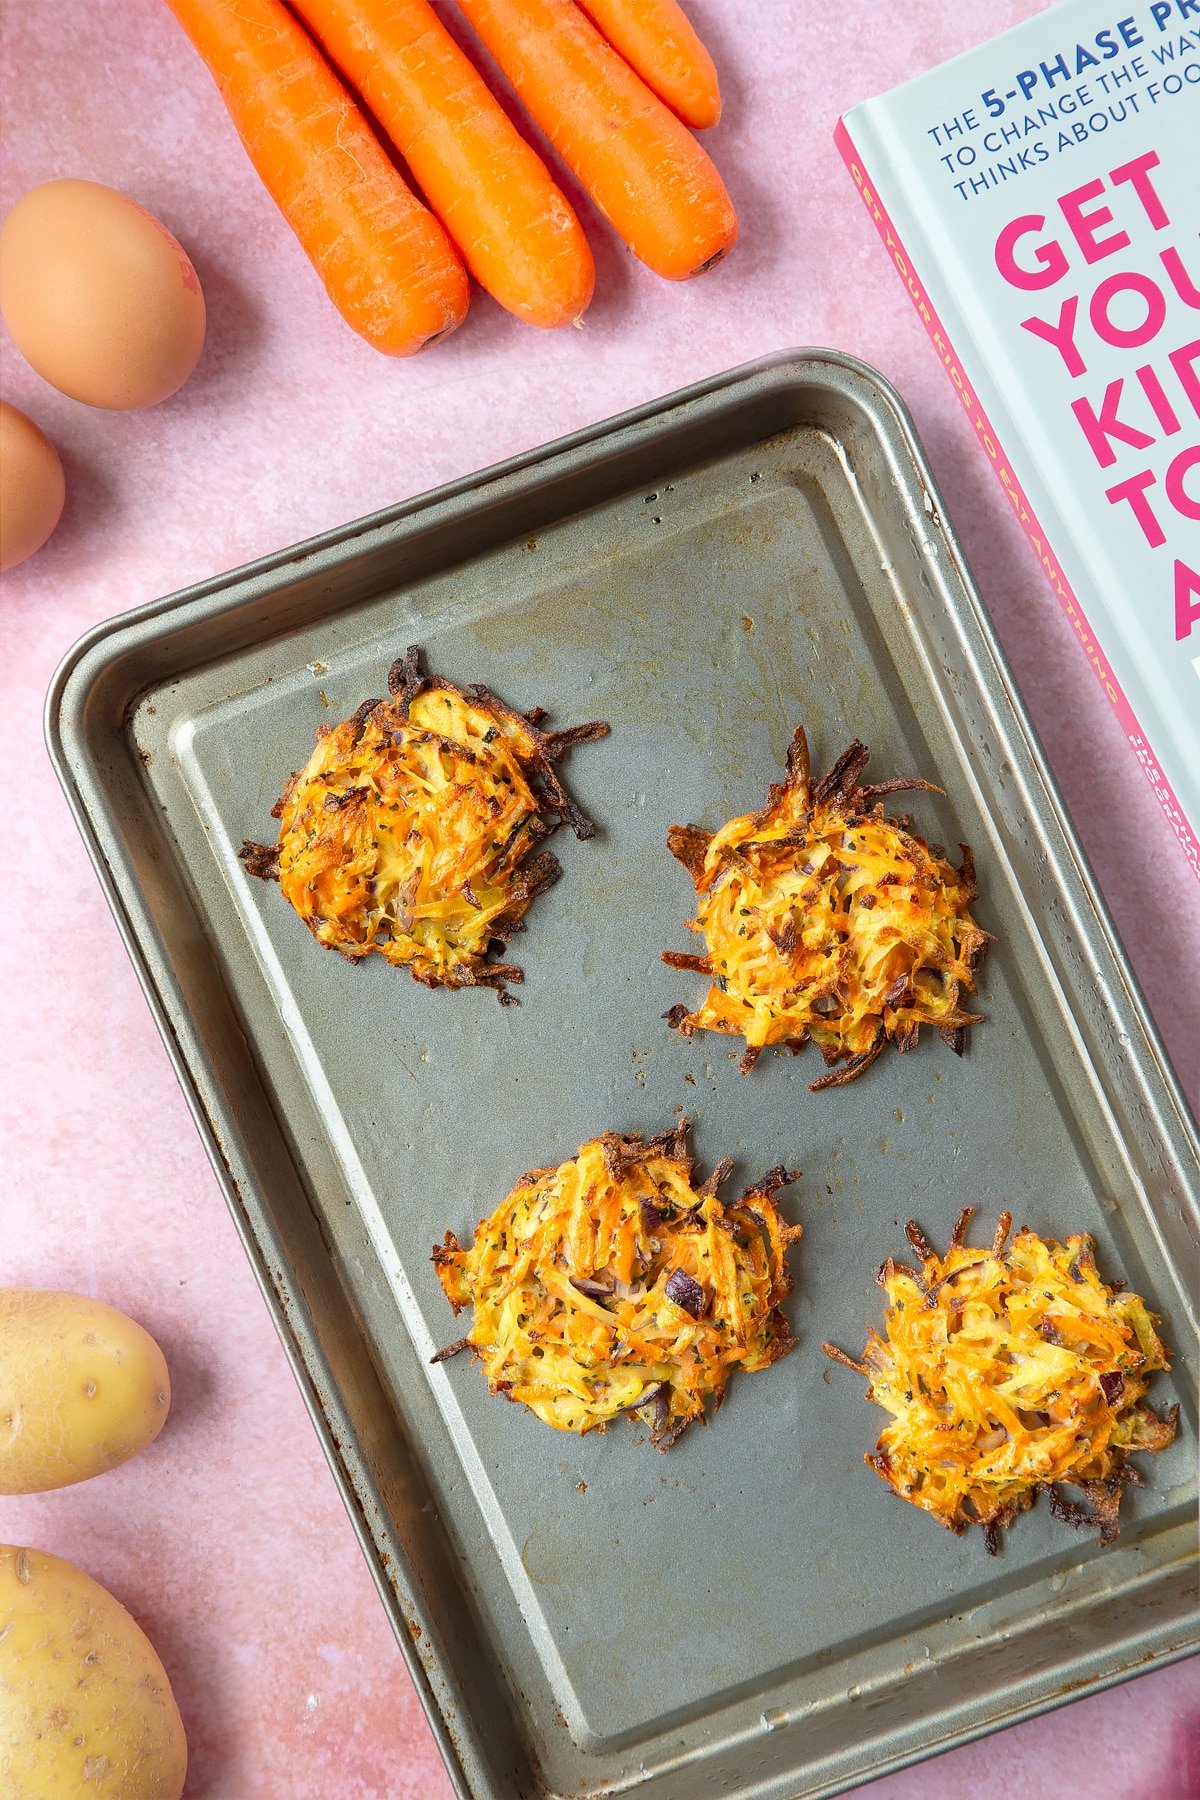 Four cooked carrot patties on an oiled baking tray. The tray is surrounded by ingredients to make carrot patties.